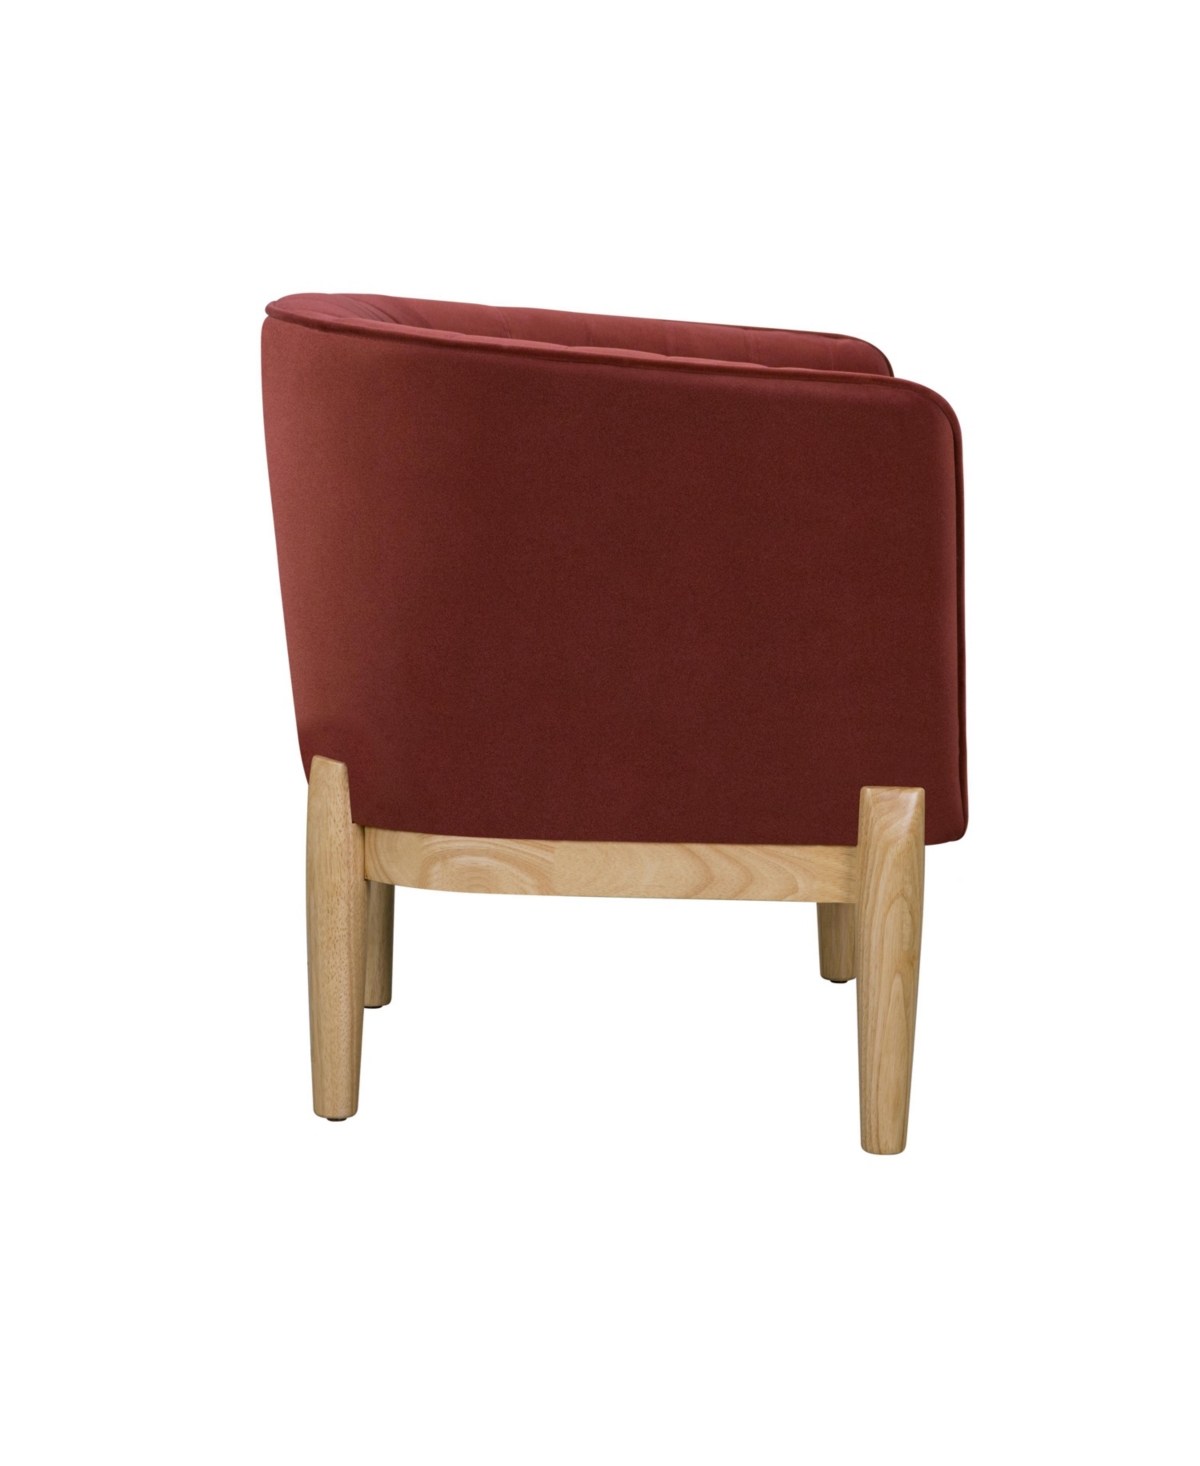 Shop Lifestyle Solutions 30.7" Velvet Catriona Accent Chair In Cinnamon